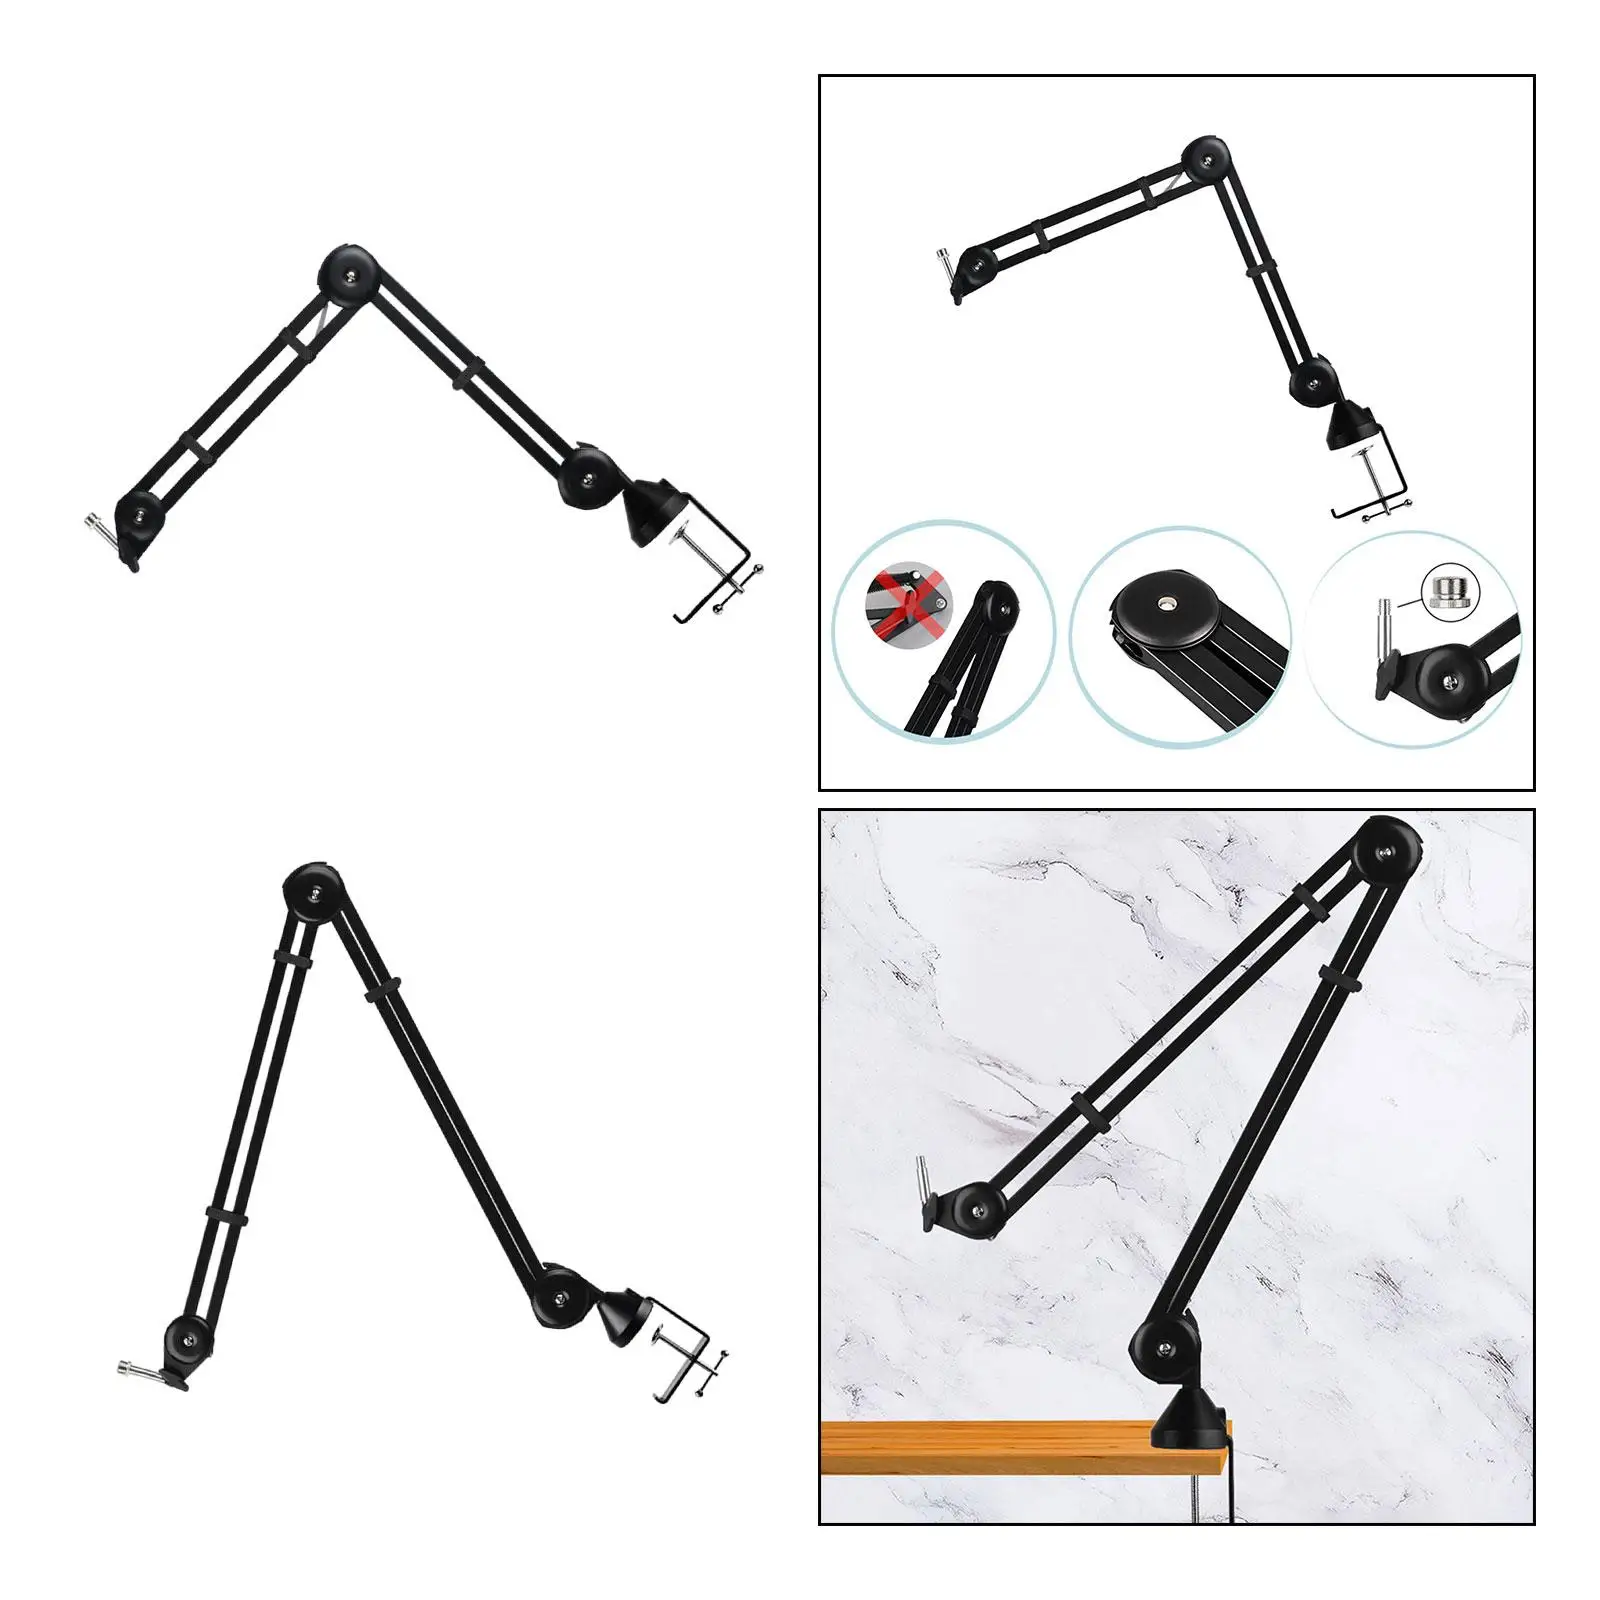 Mount Mic Holder Flexible 360 Degree Rotary Universal Adjustable for Conference Performance Concert